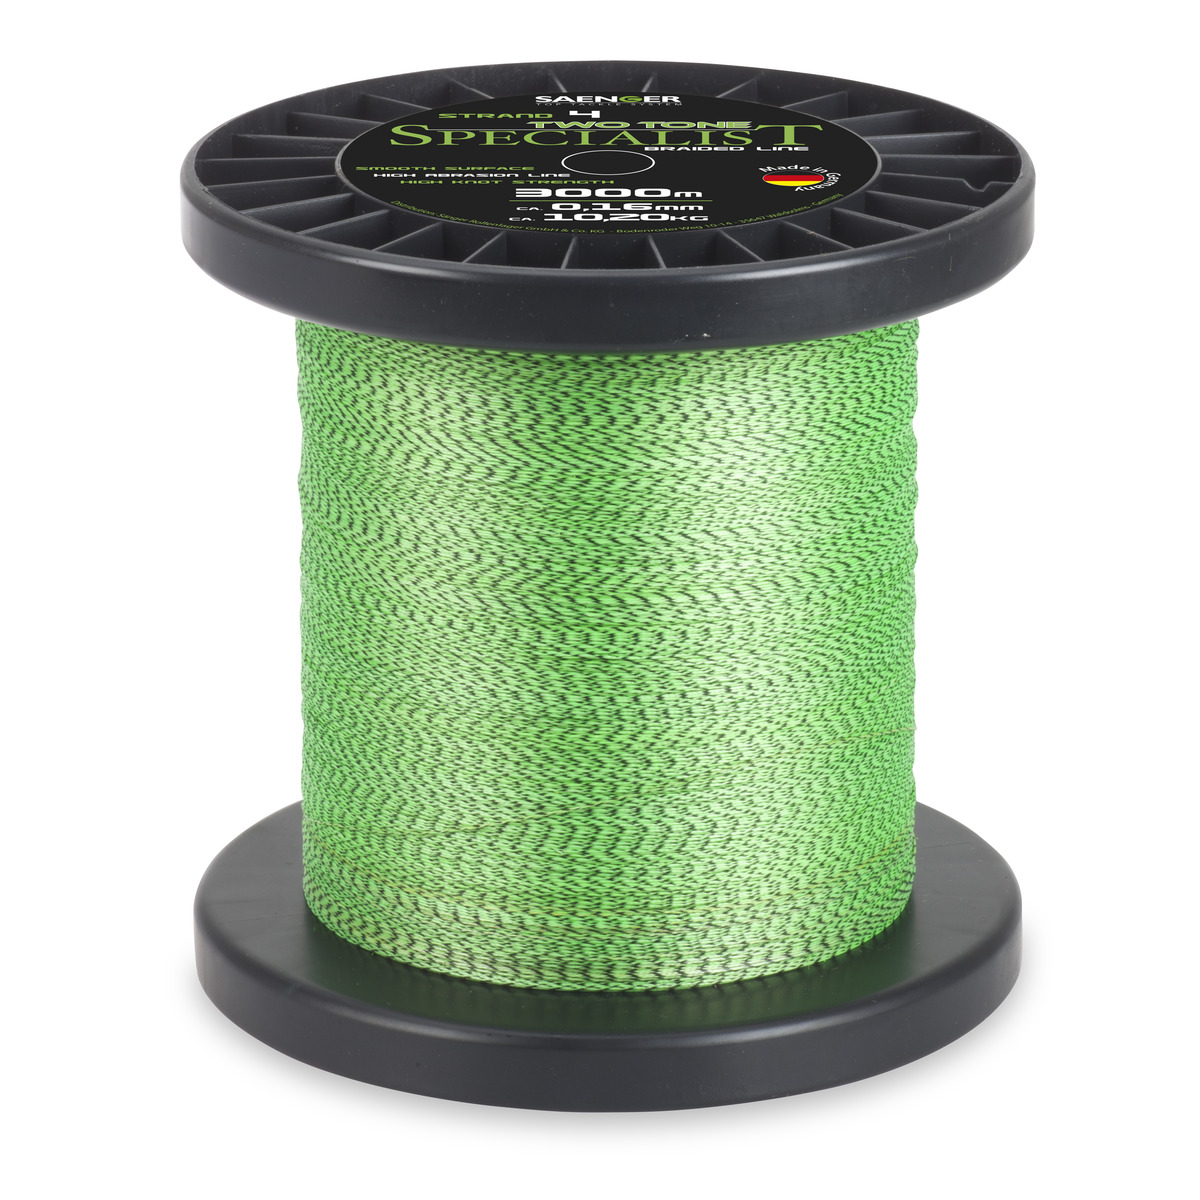 Saenger Specialist Two Tone Fluo Braid - 0,20 mm - 14,5kg 3000 m